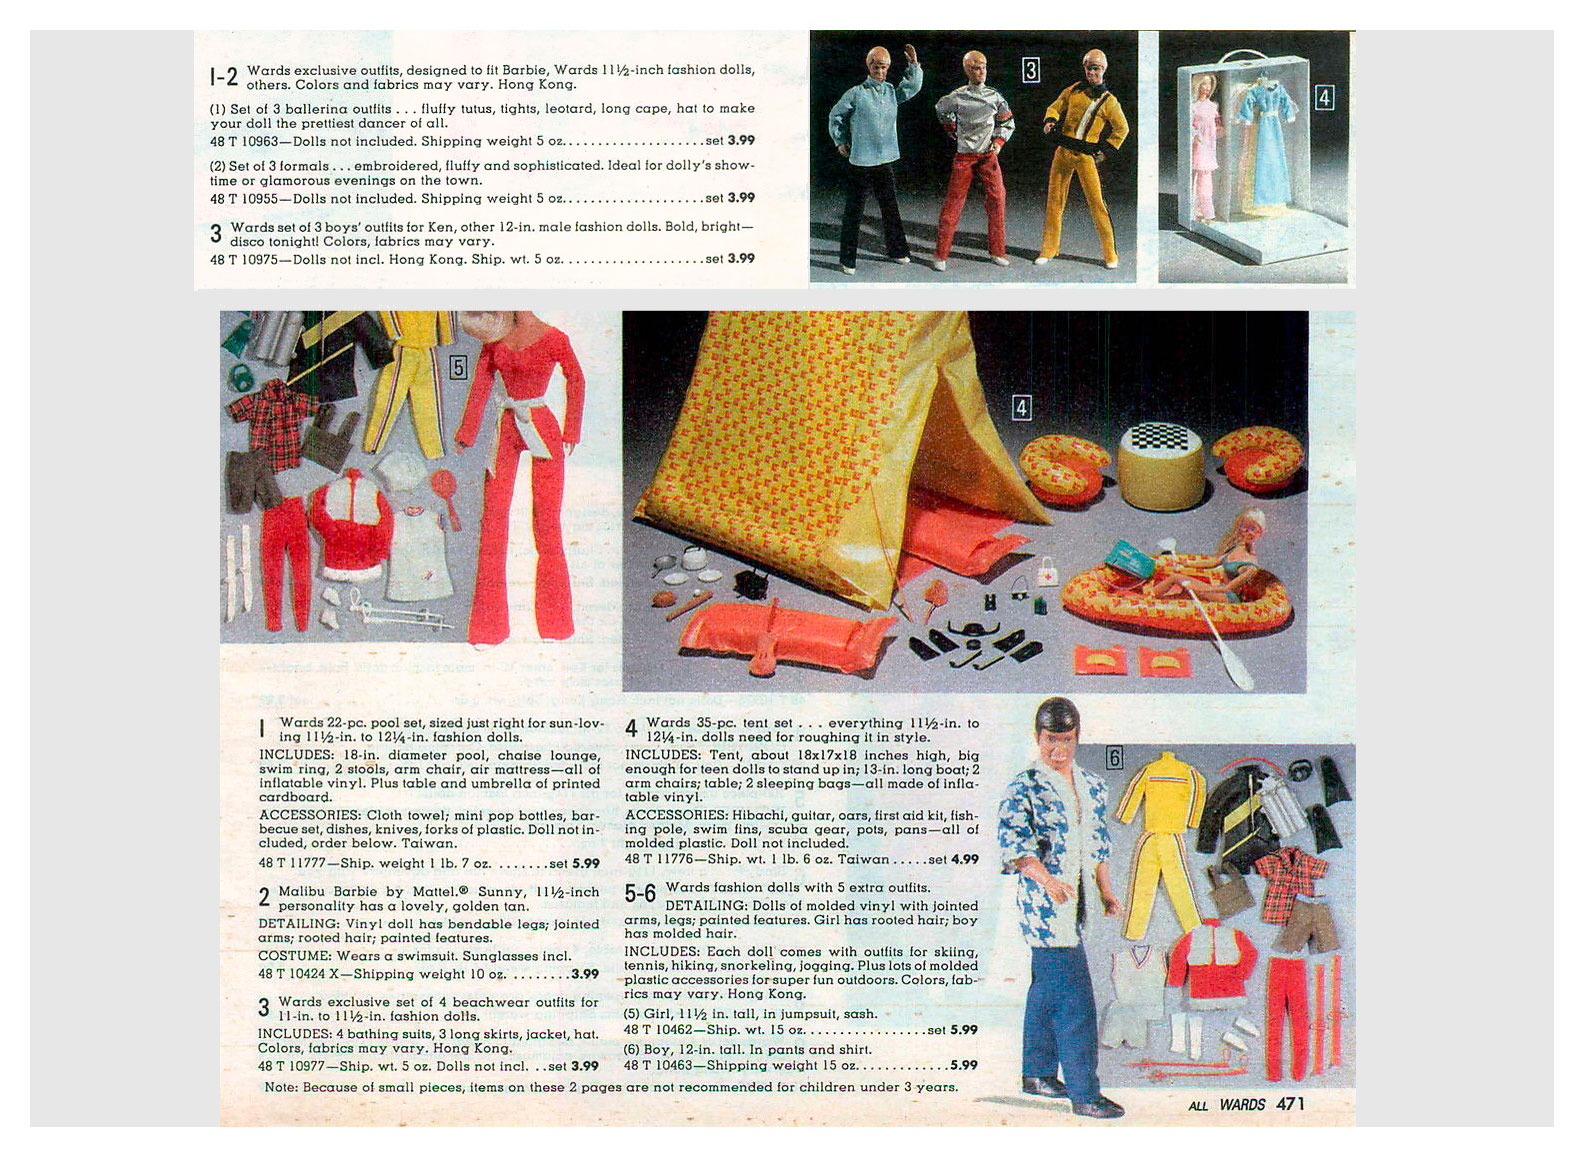 From 1979 Montgomery Ward Christmas catalogue